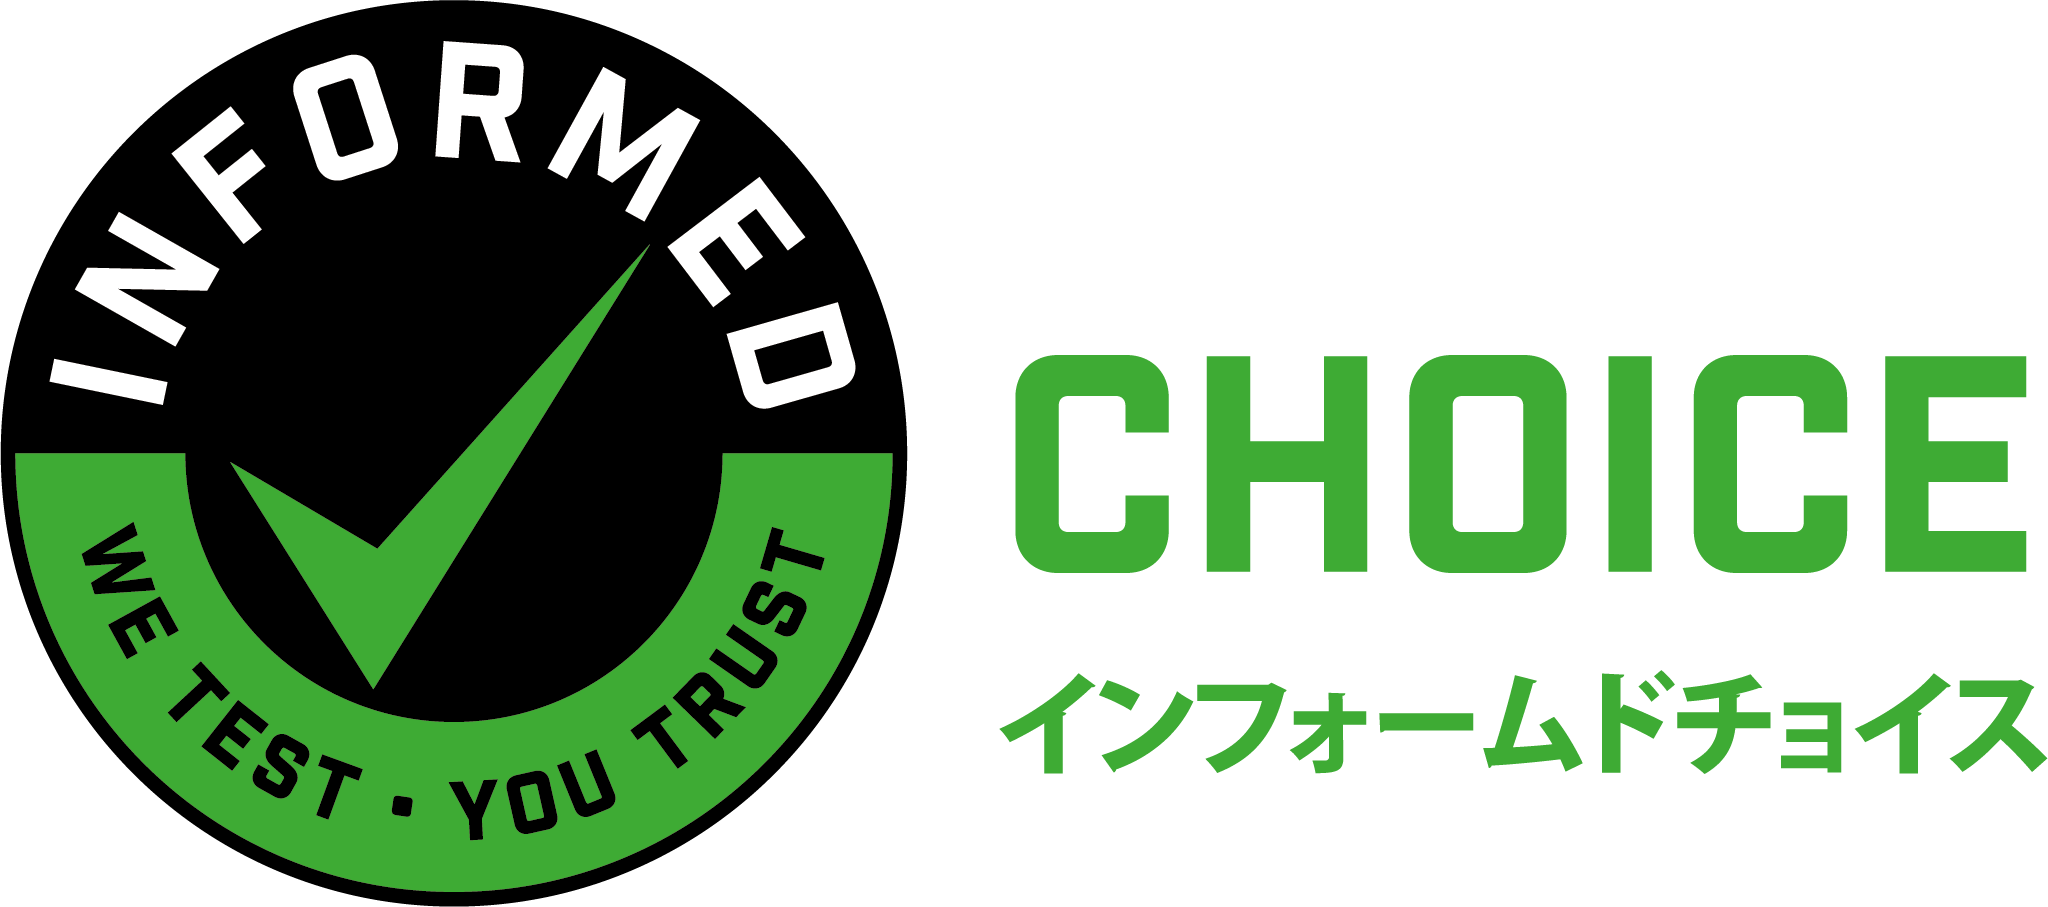 INFORMED CHOICE Trusted by sport